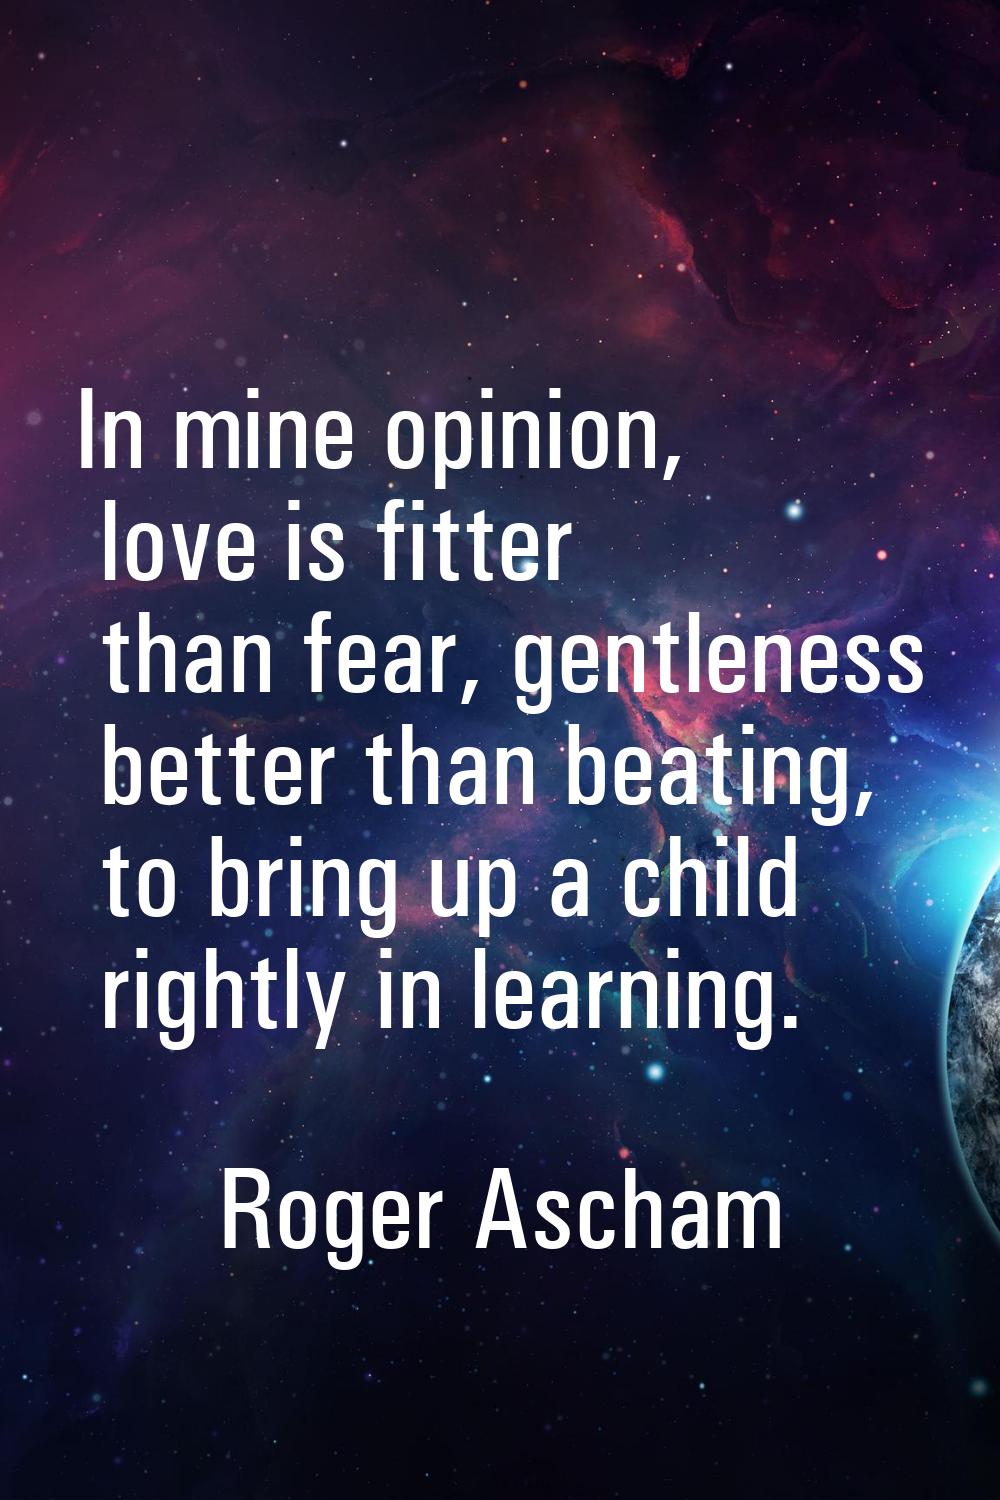 In mine opinion, love is fitter than fear, gentleness better than beating, to bring up a child righ